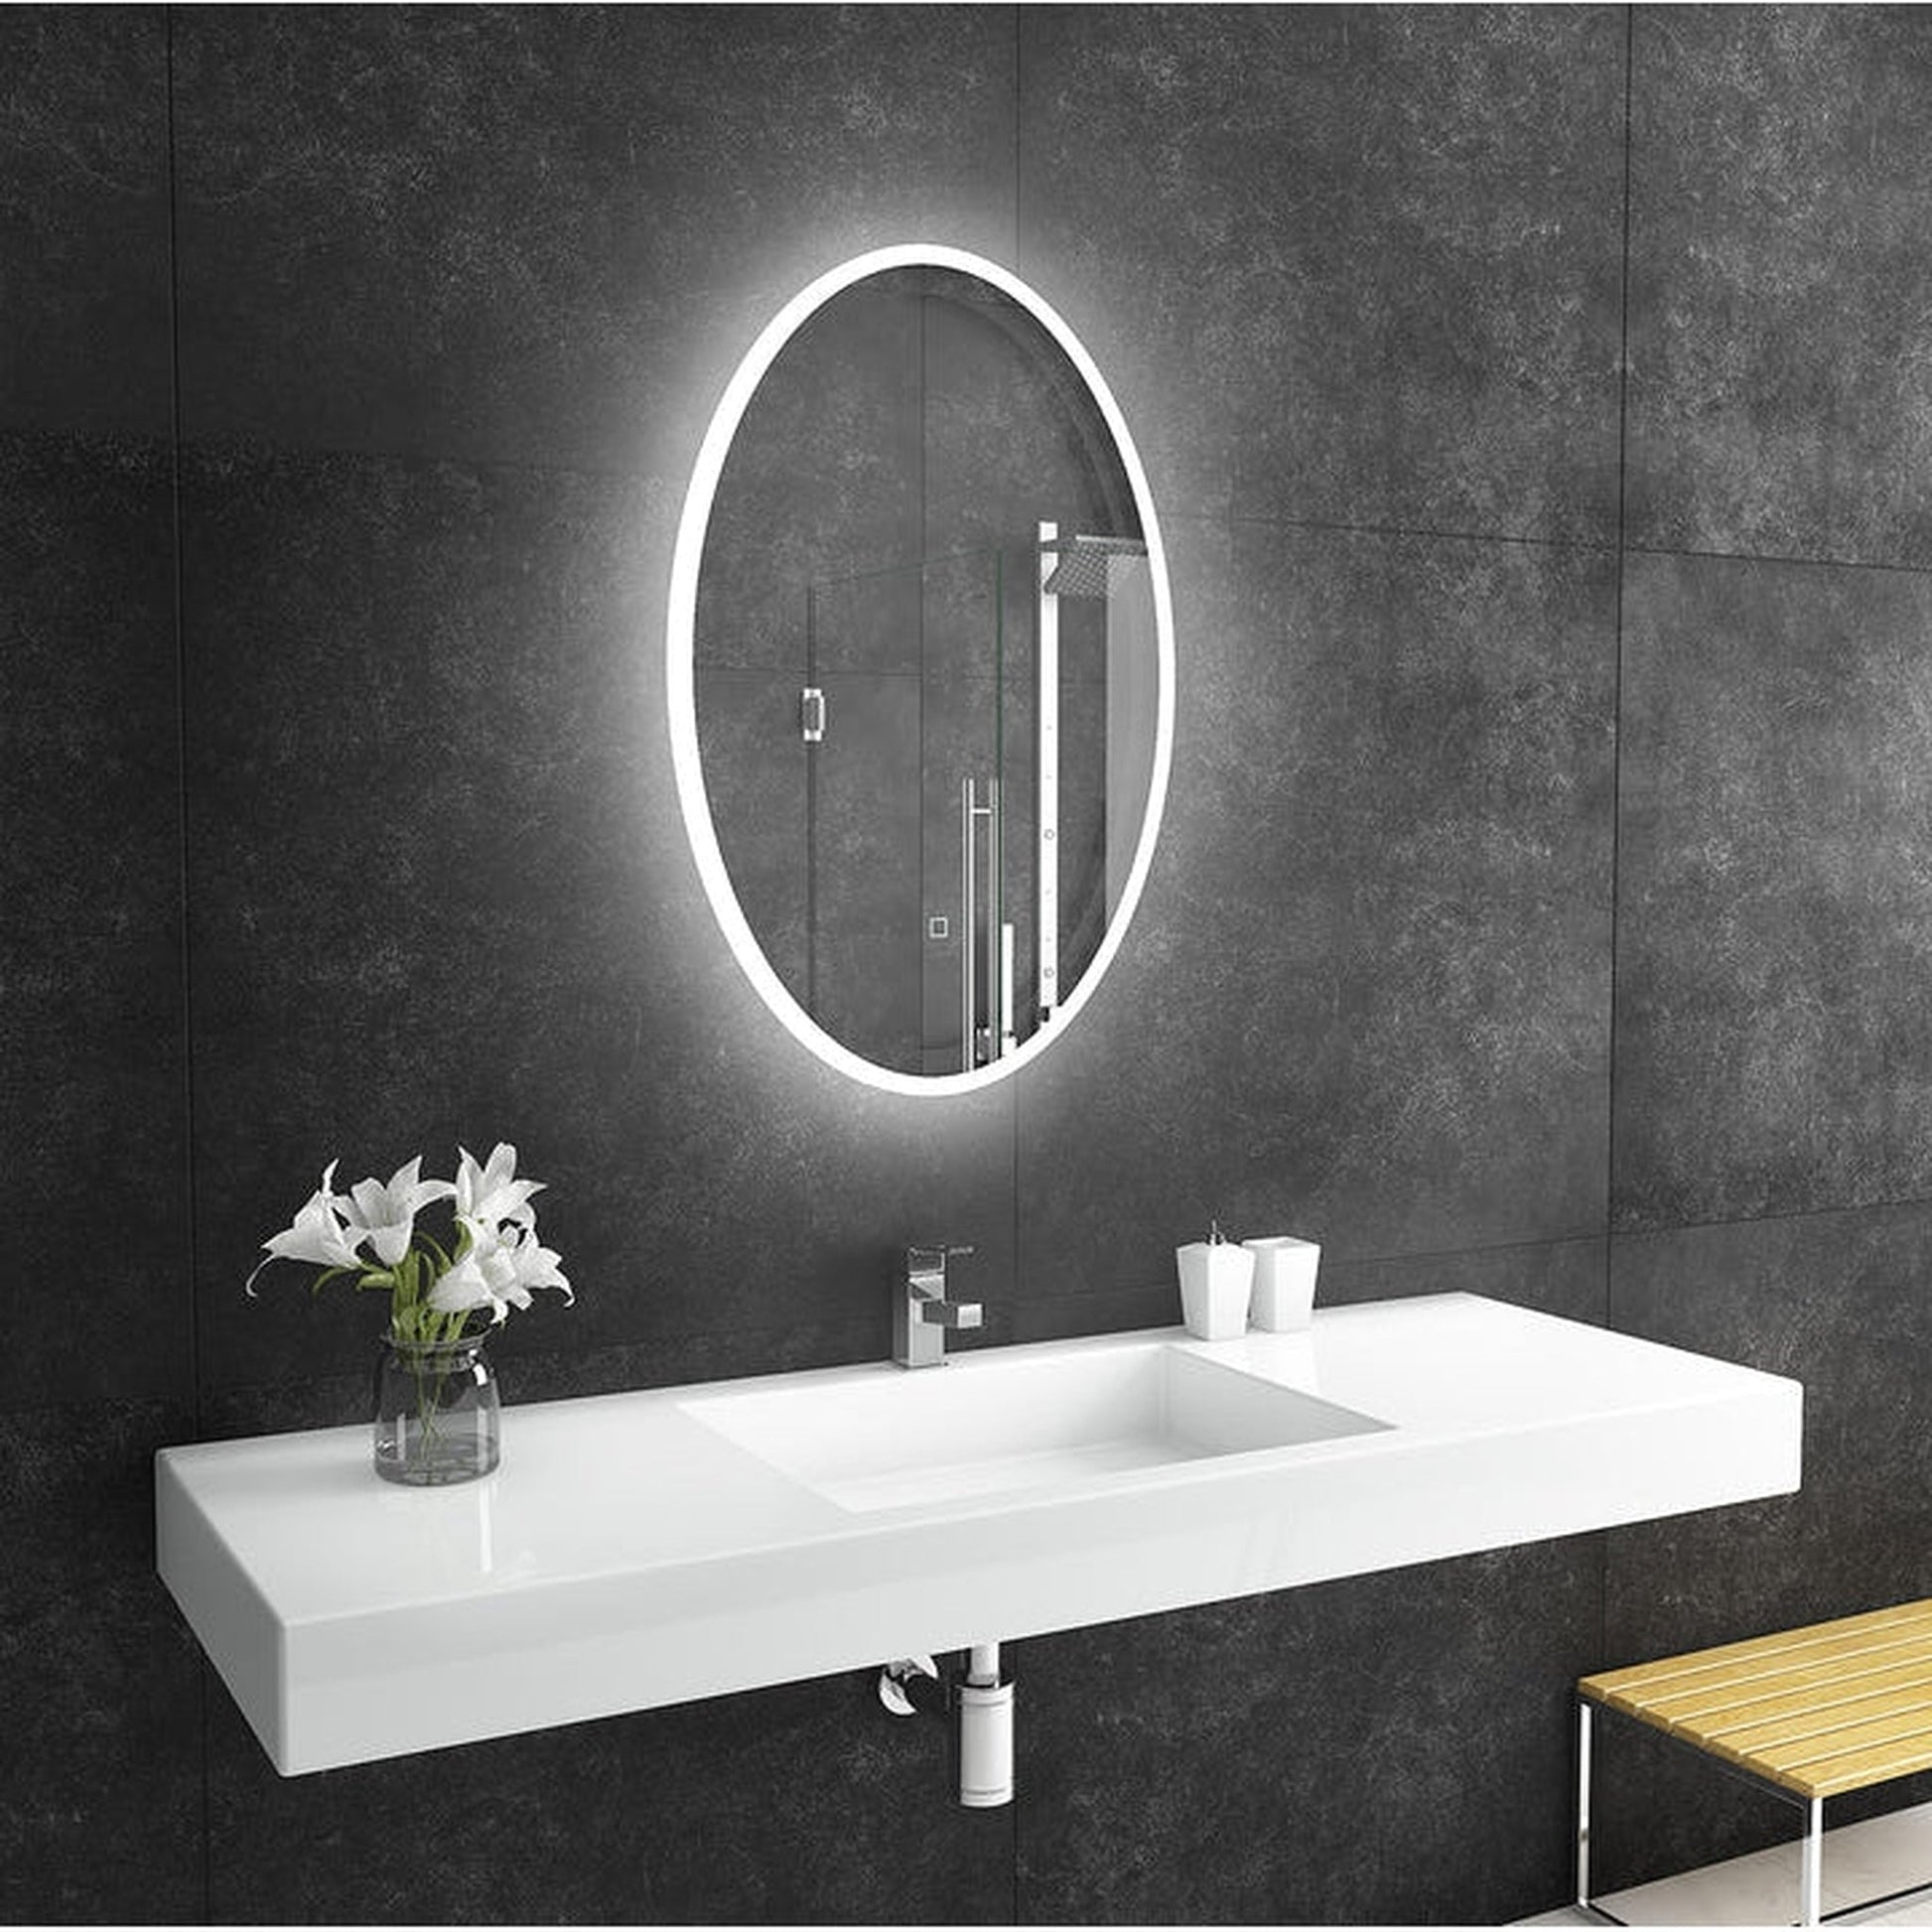 Paris Mirror Reflection 24" x 36" Oval Backlit Lighted Super Bright Dimmable Wall-Mounted 6000K LED Mirror With Frosted Edged Lighted Frame and Integrated Defogger System